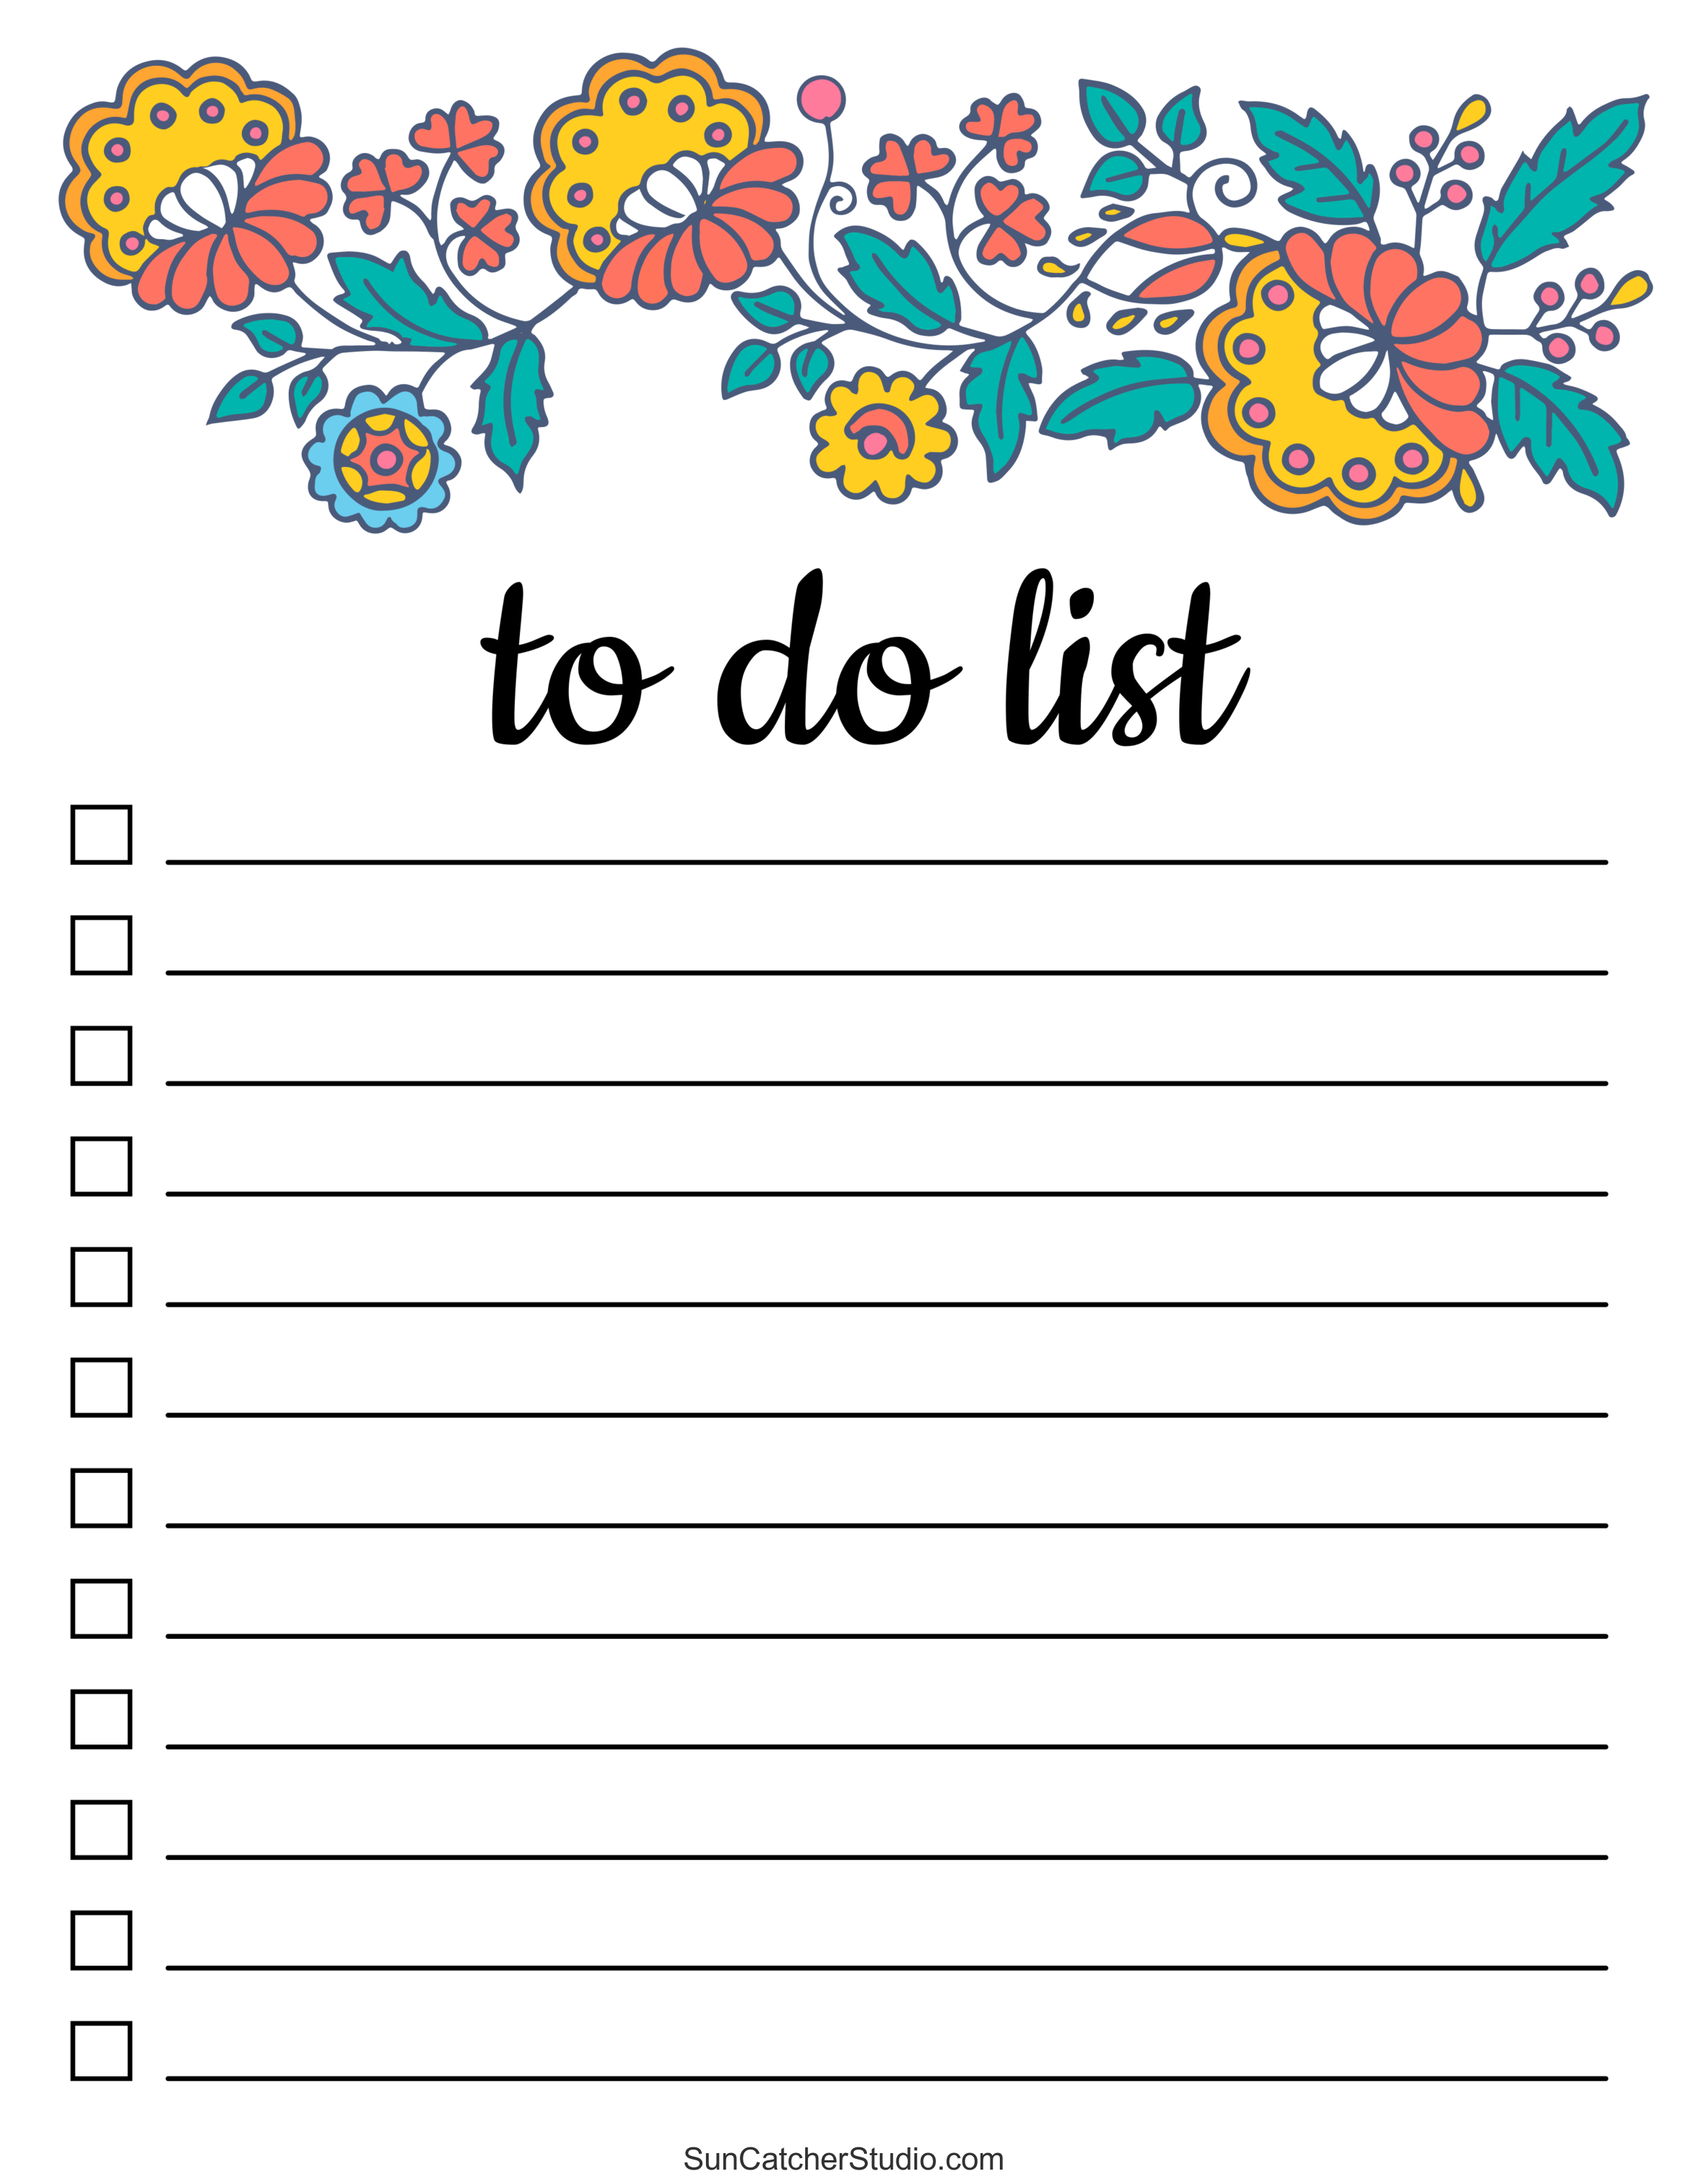 to-do-list-free-printable-pdf-templates-things-to-do-diy-projects-patterns-monograms